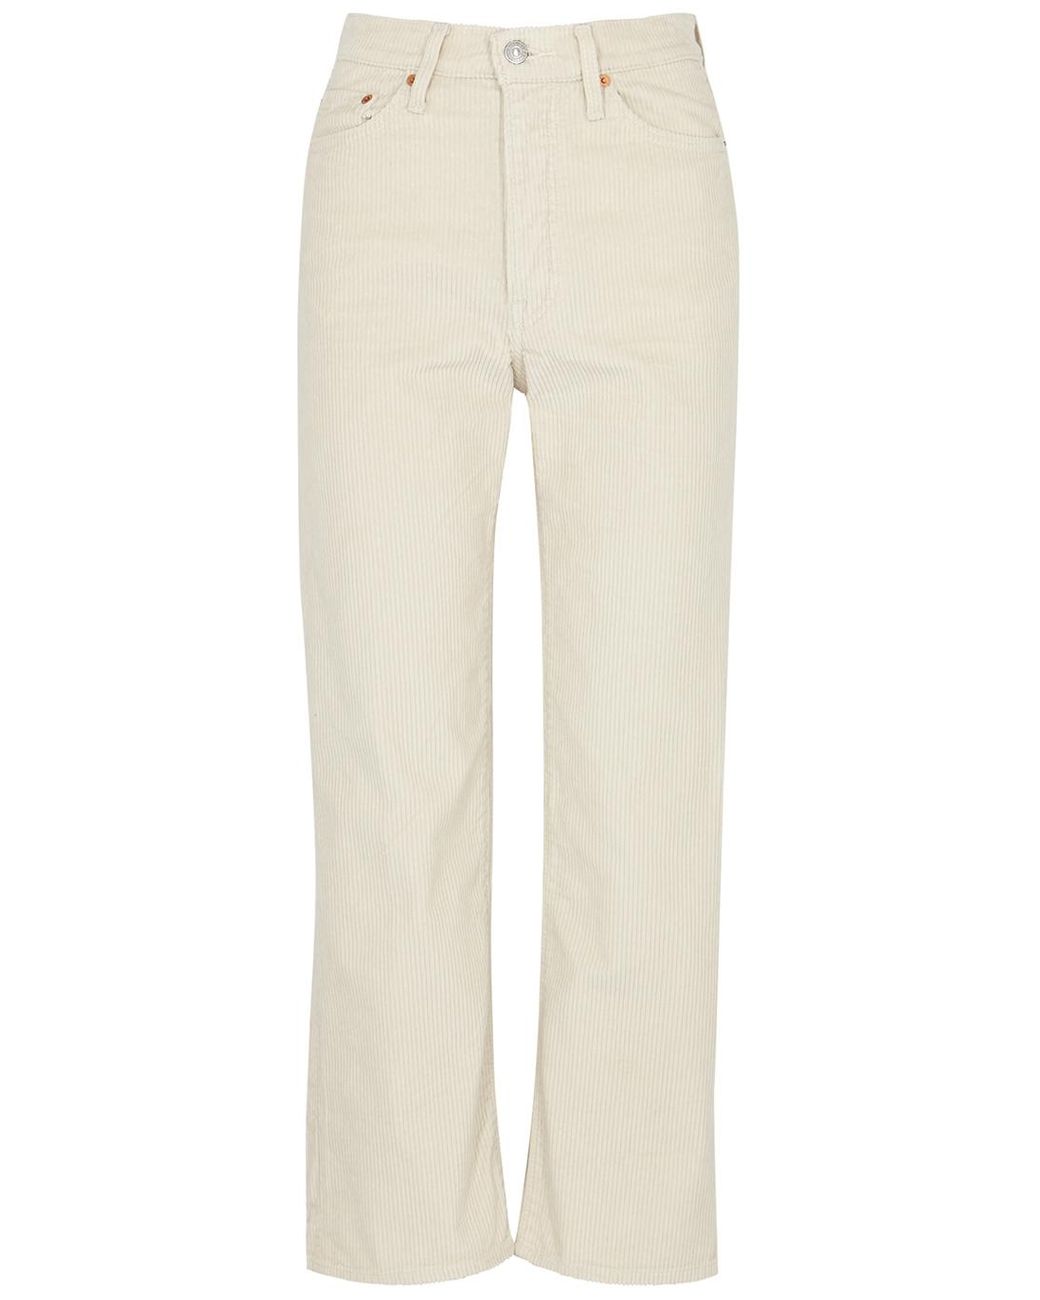 Levi's Ribcage Cream Corduroy Straight-leg Jeans in Natural | Lyst UK